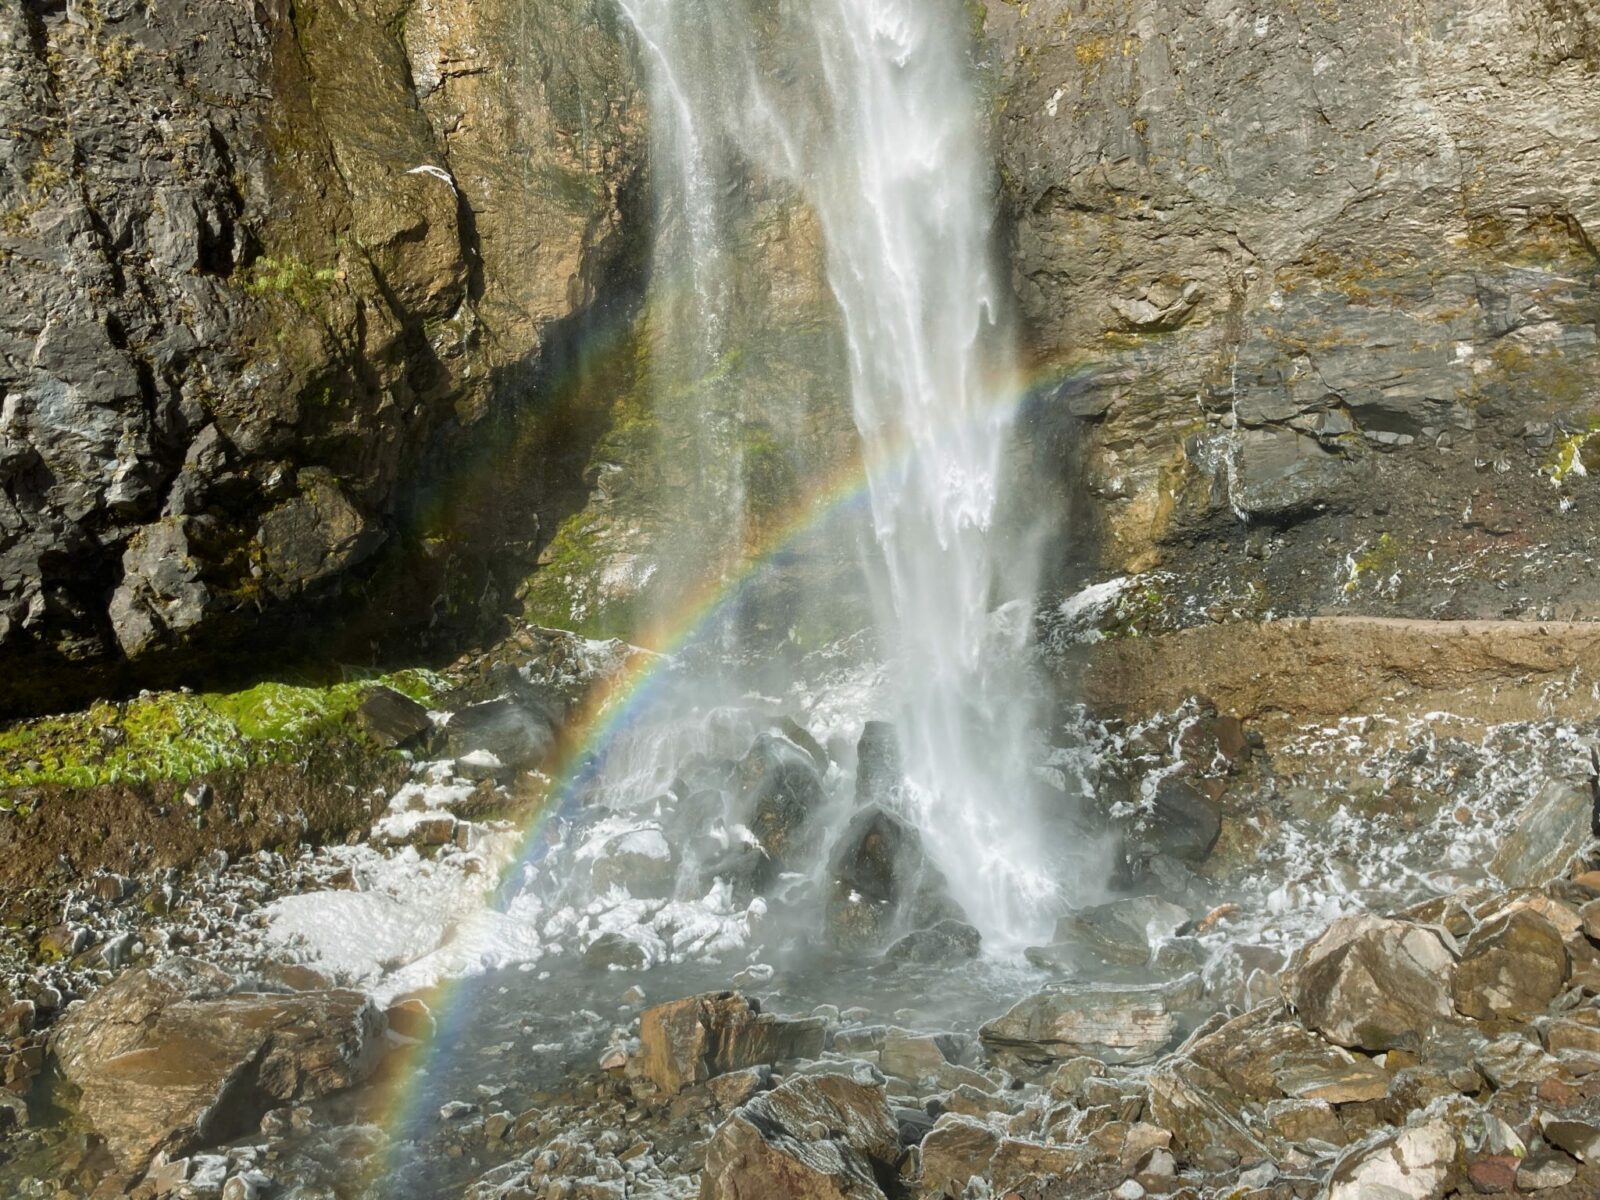 The base of Comet Falls crashes onto frosty rocks. There is also foam from the waterfall and a rainbow arcs across the base of the waterfall